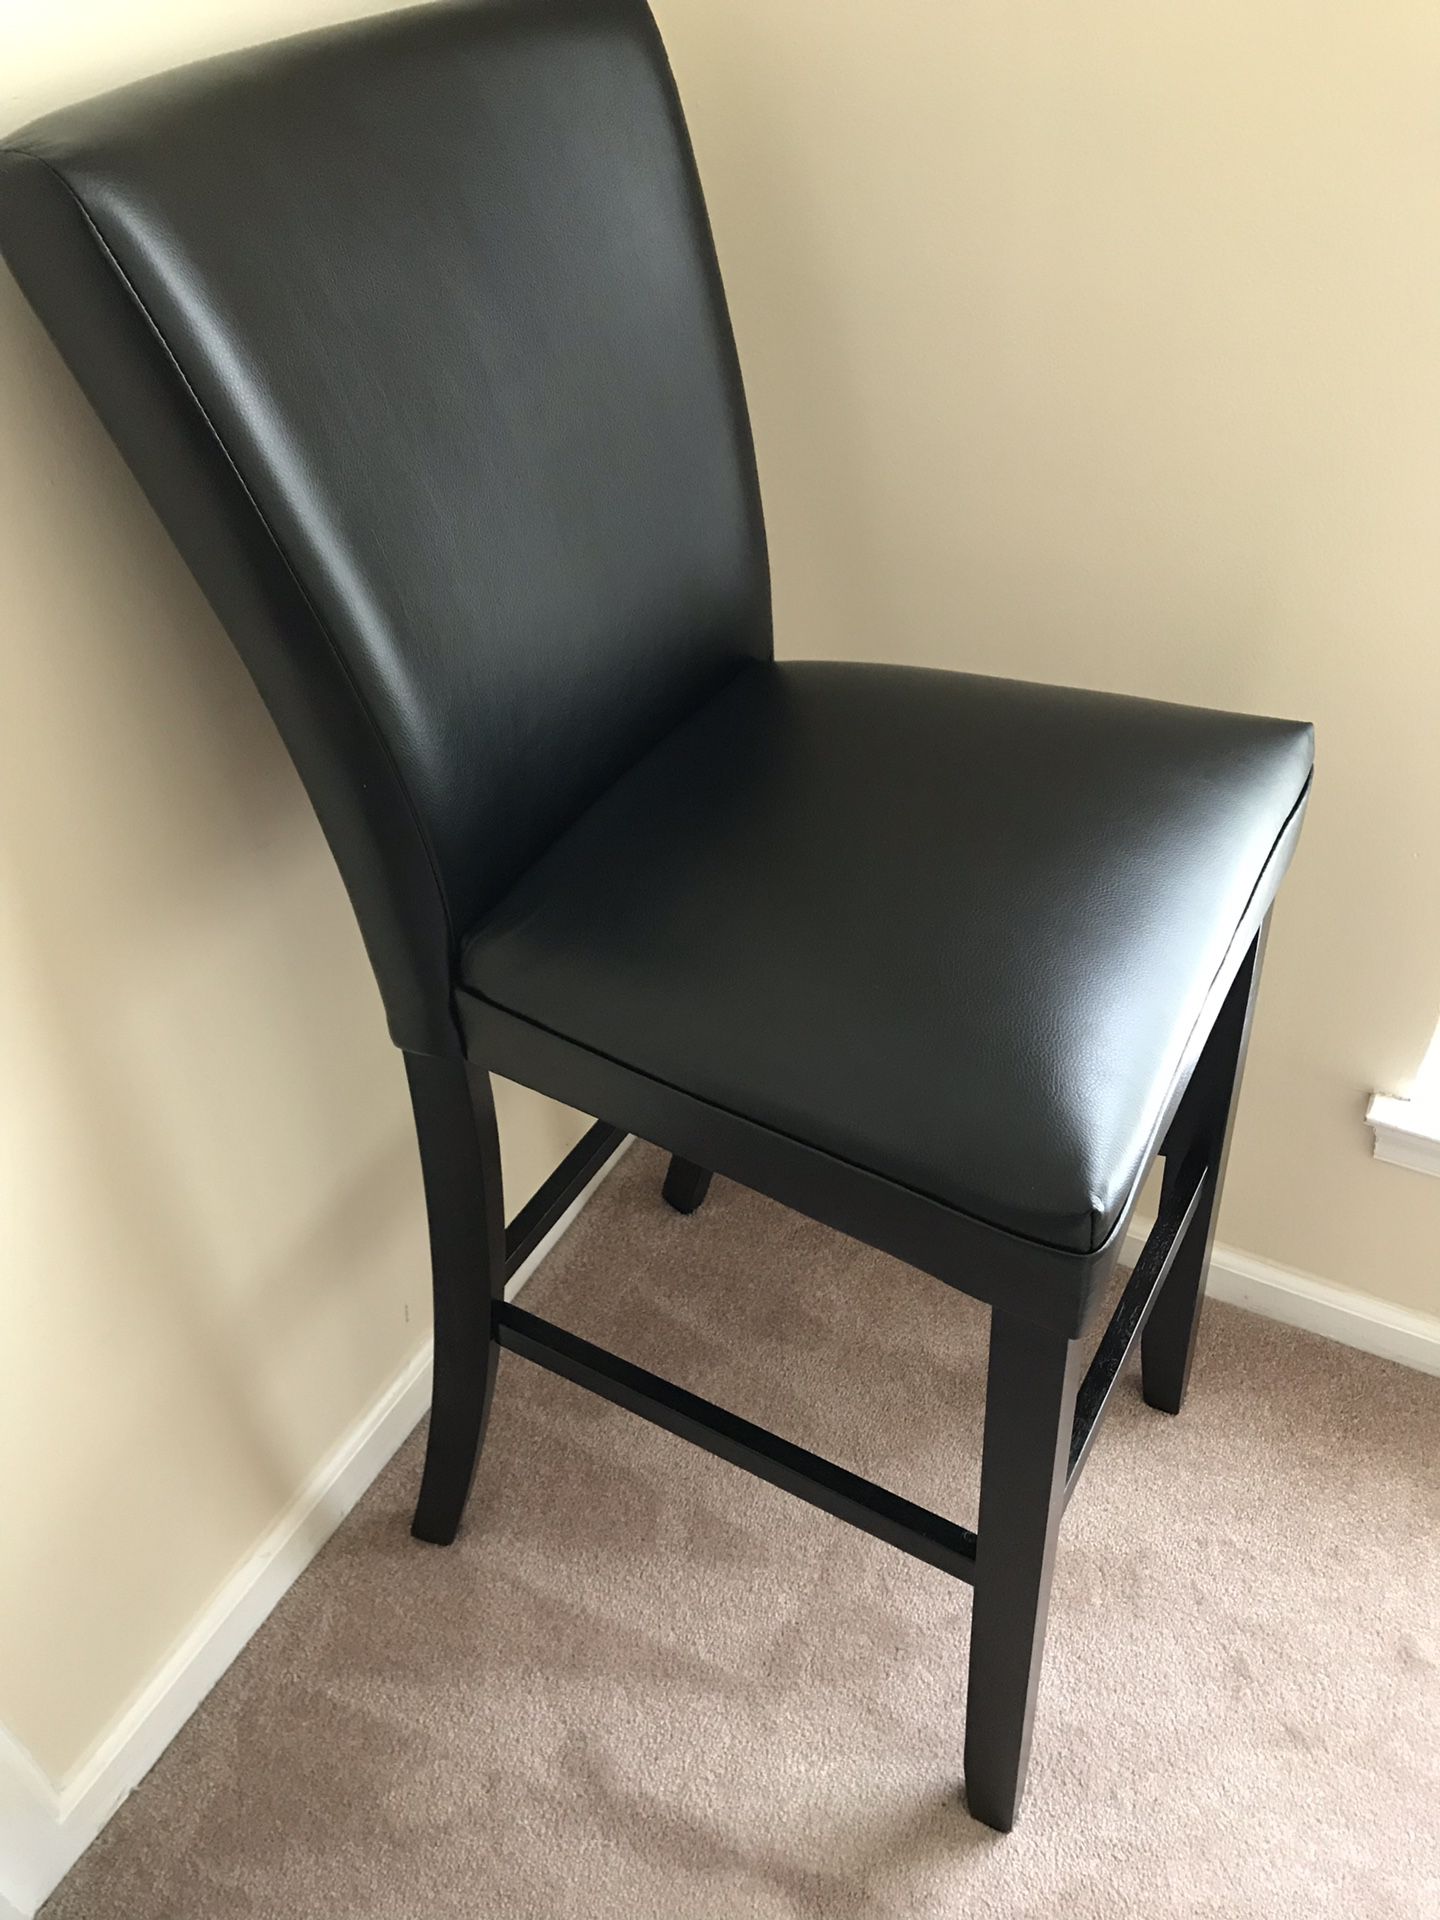 Brand new 36 inch black leather barstool Chair